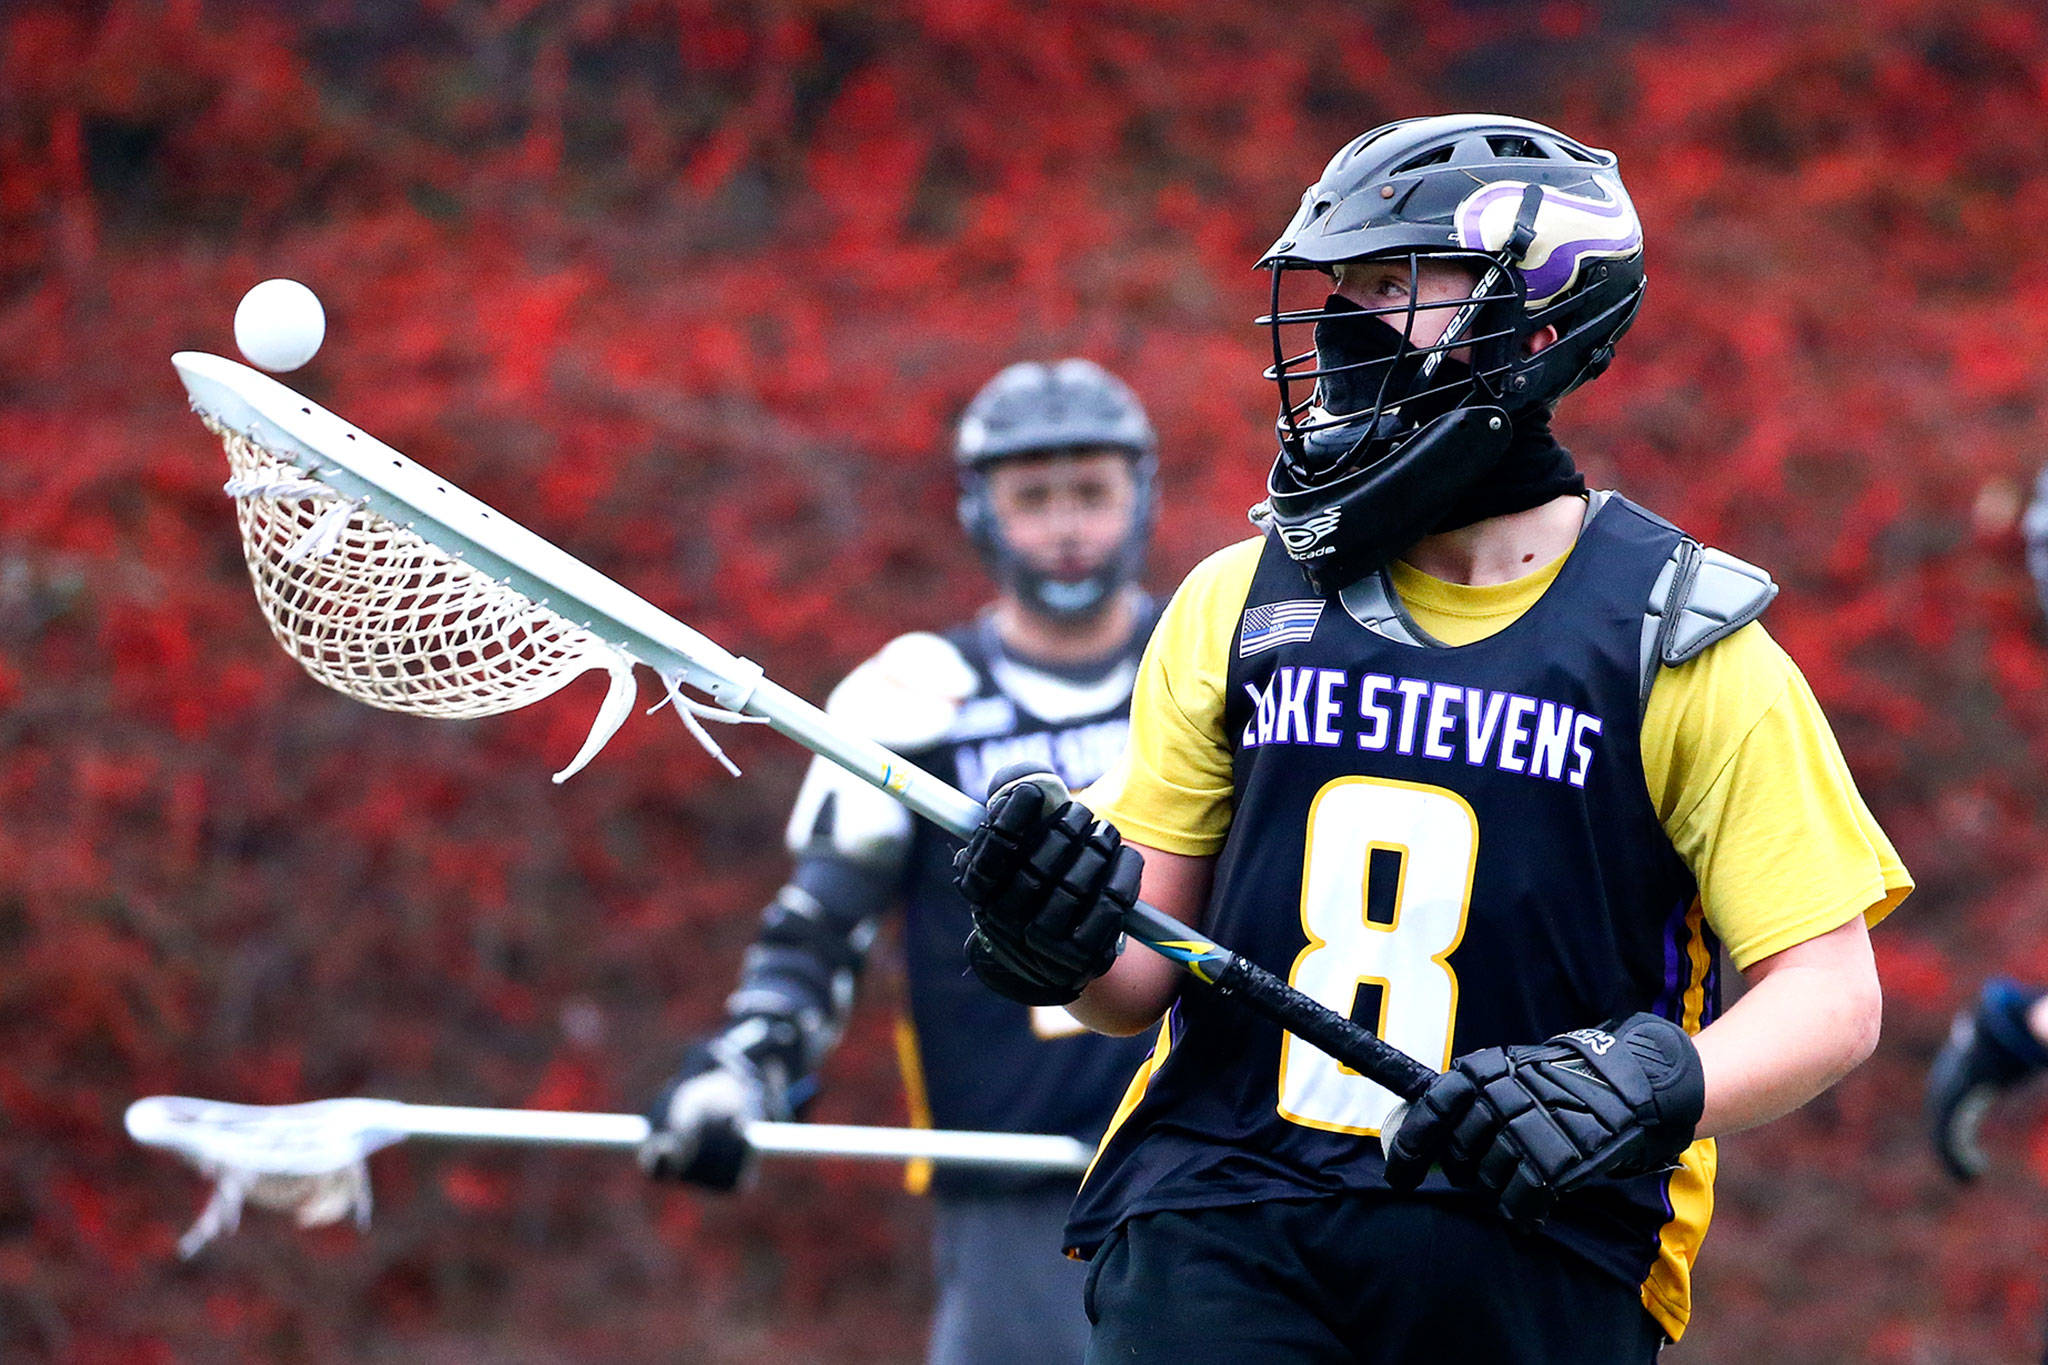 Lake Stevens Byron Gerber participates in a drill during a lacrosse practice at Cavalero Mid High School on Dec. 8, 2019 in Lake Stevens. (Kevin Clark / The Herald)